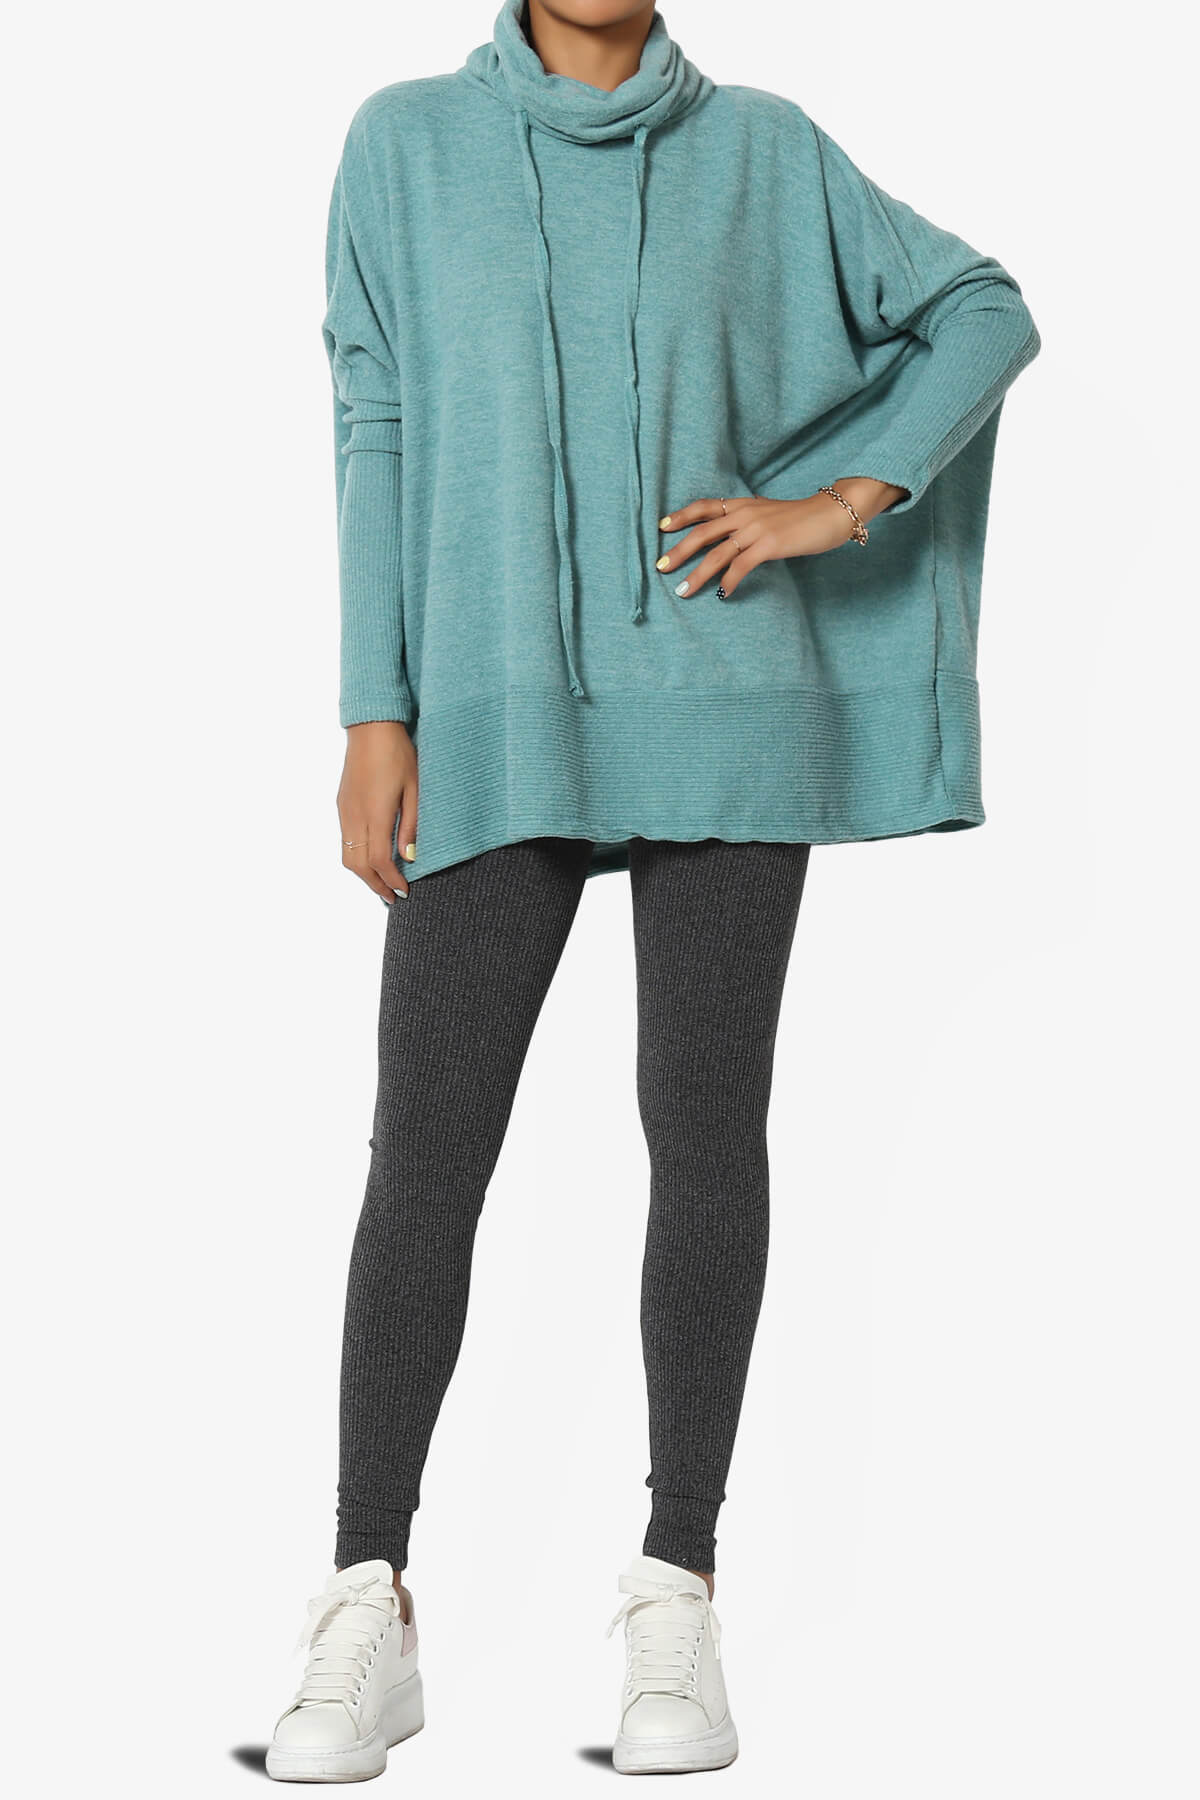 Barclay Cowl Neck Melange Knit Oversized Sweater DUSTY TEAL_6